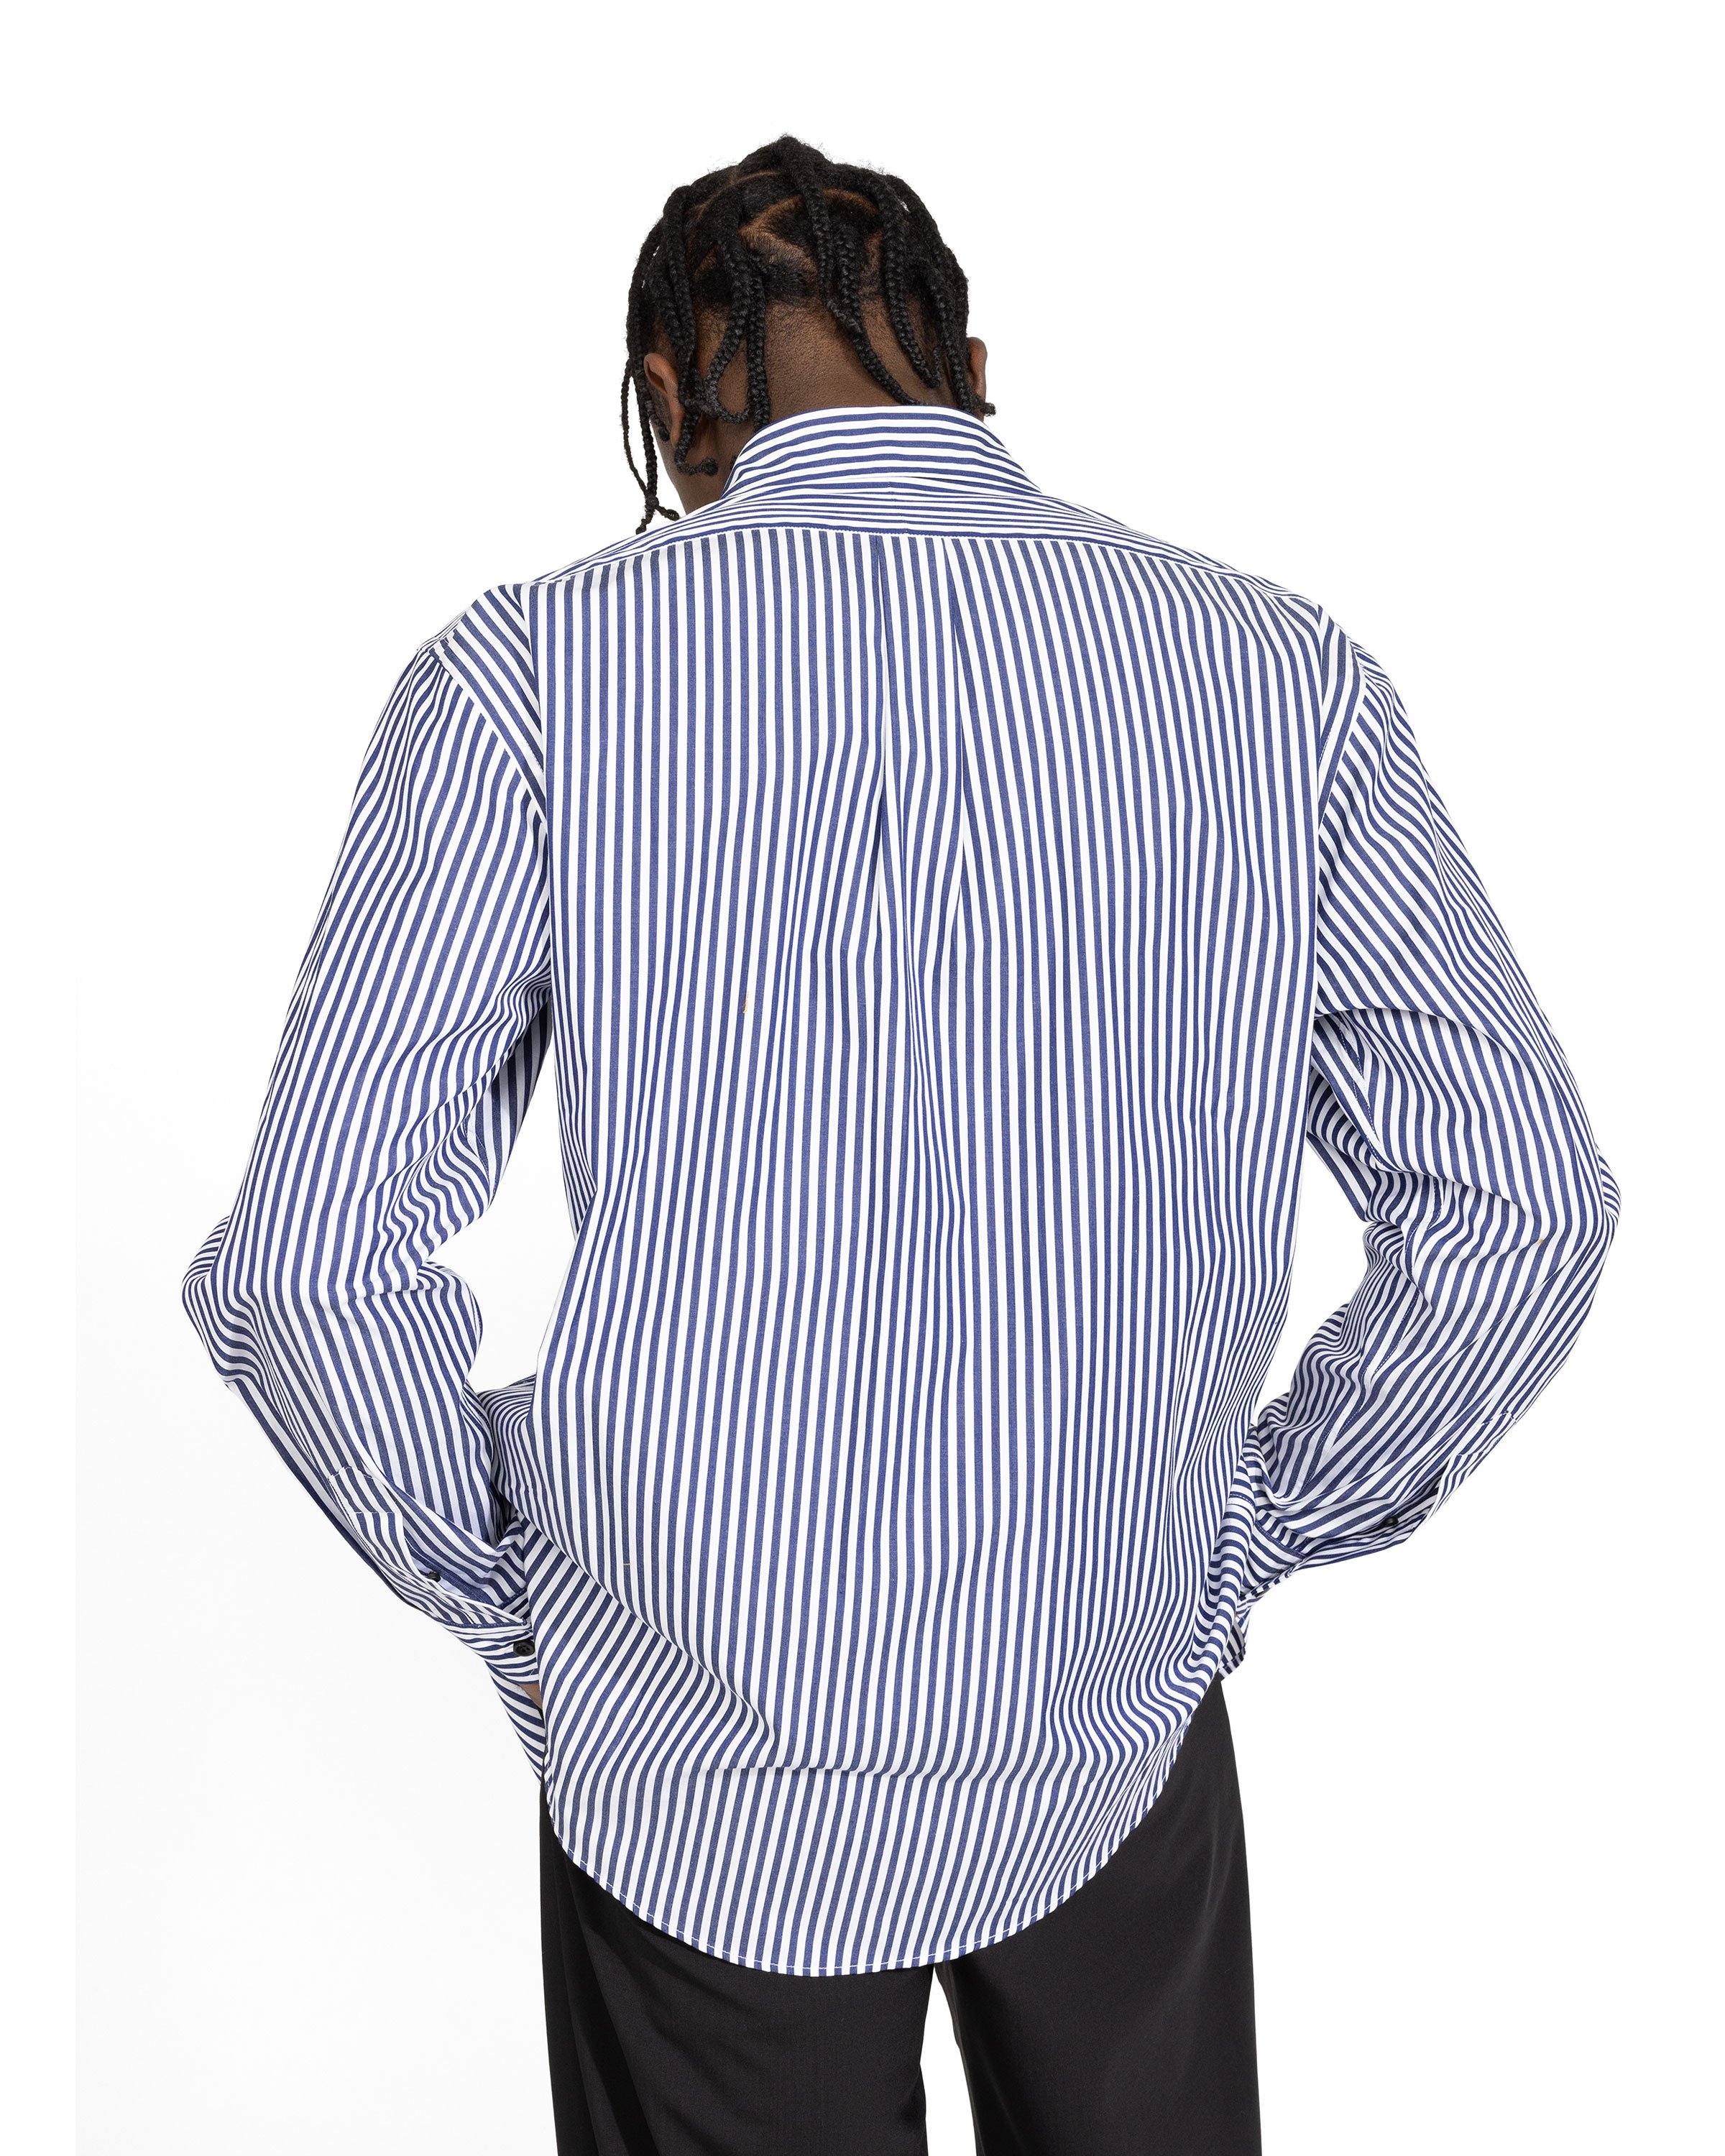 Y/Project - Pinched Logo Stripe Shirt Navy/White - Clothing - Blue - Image 3